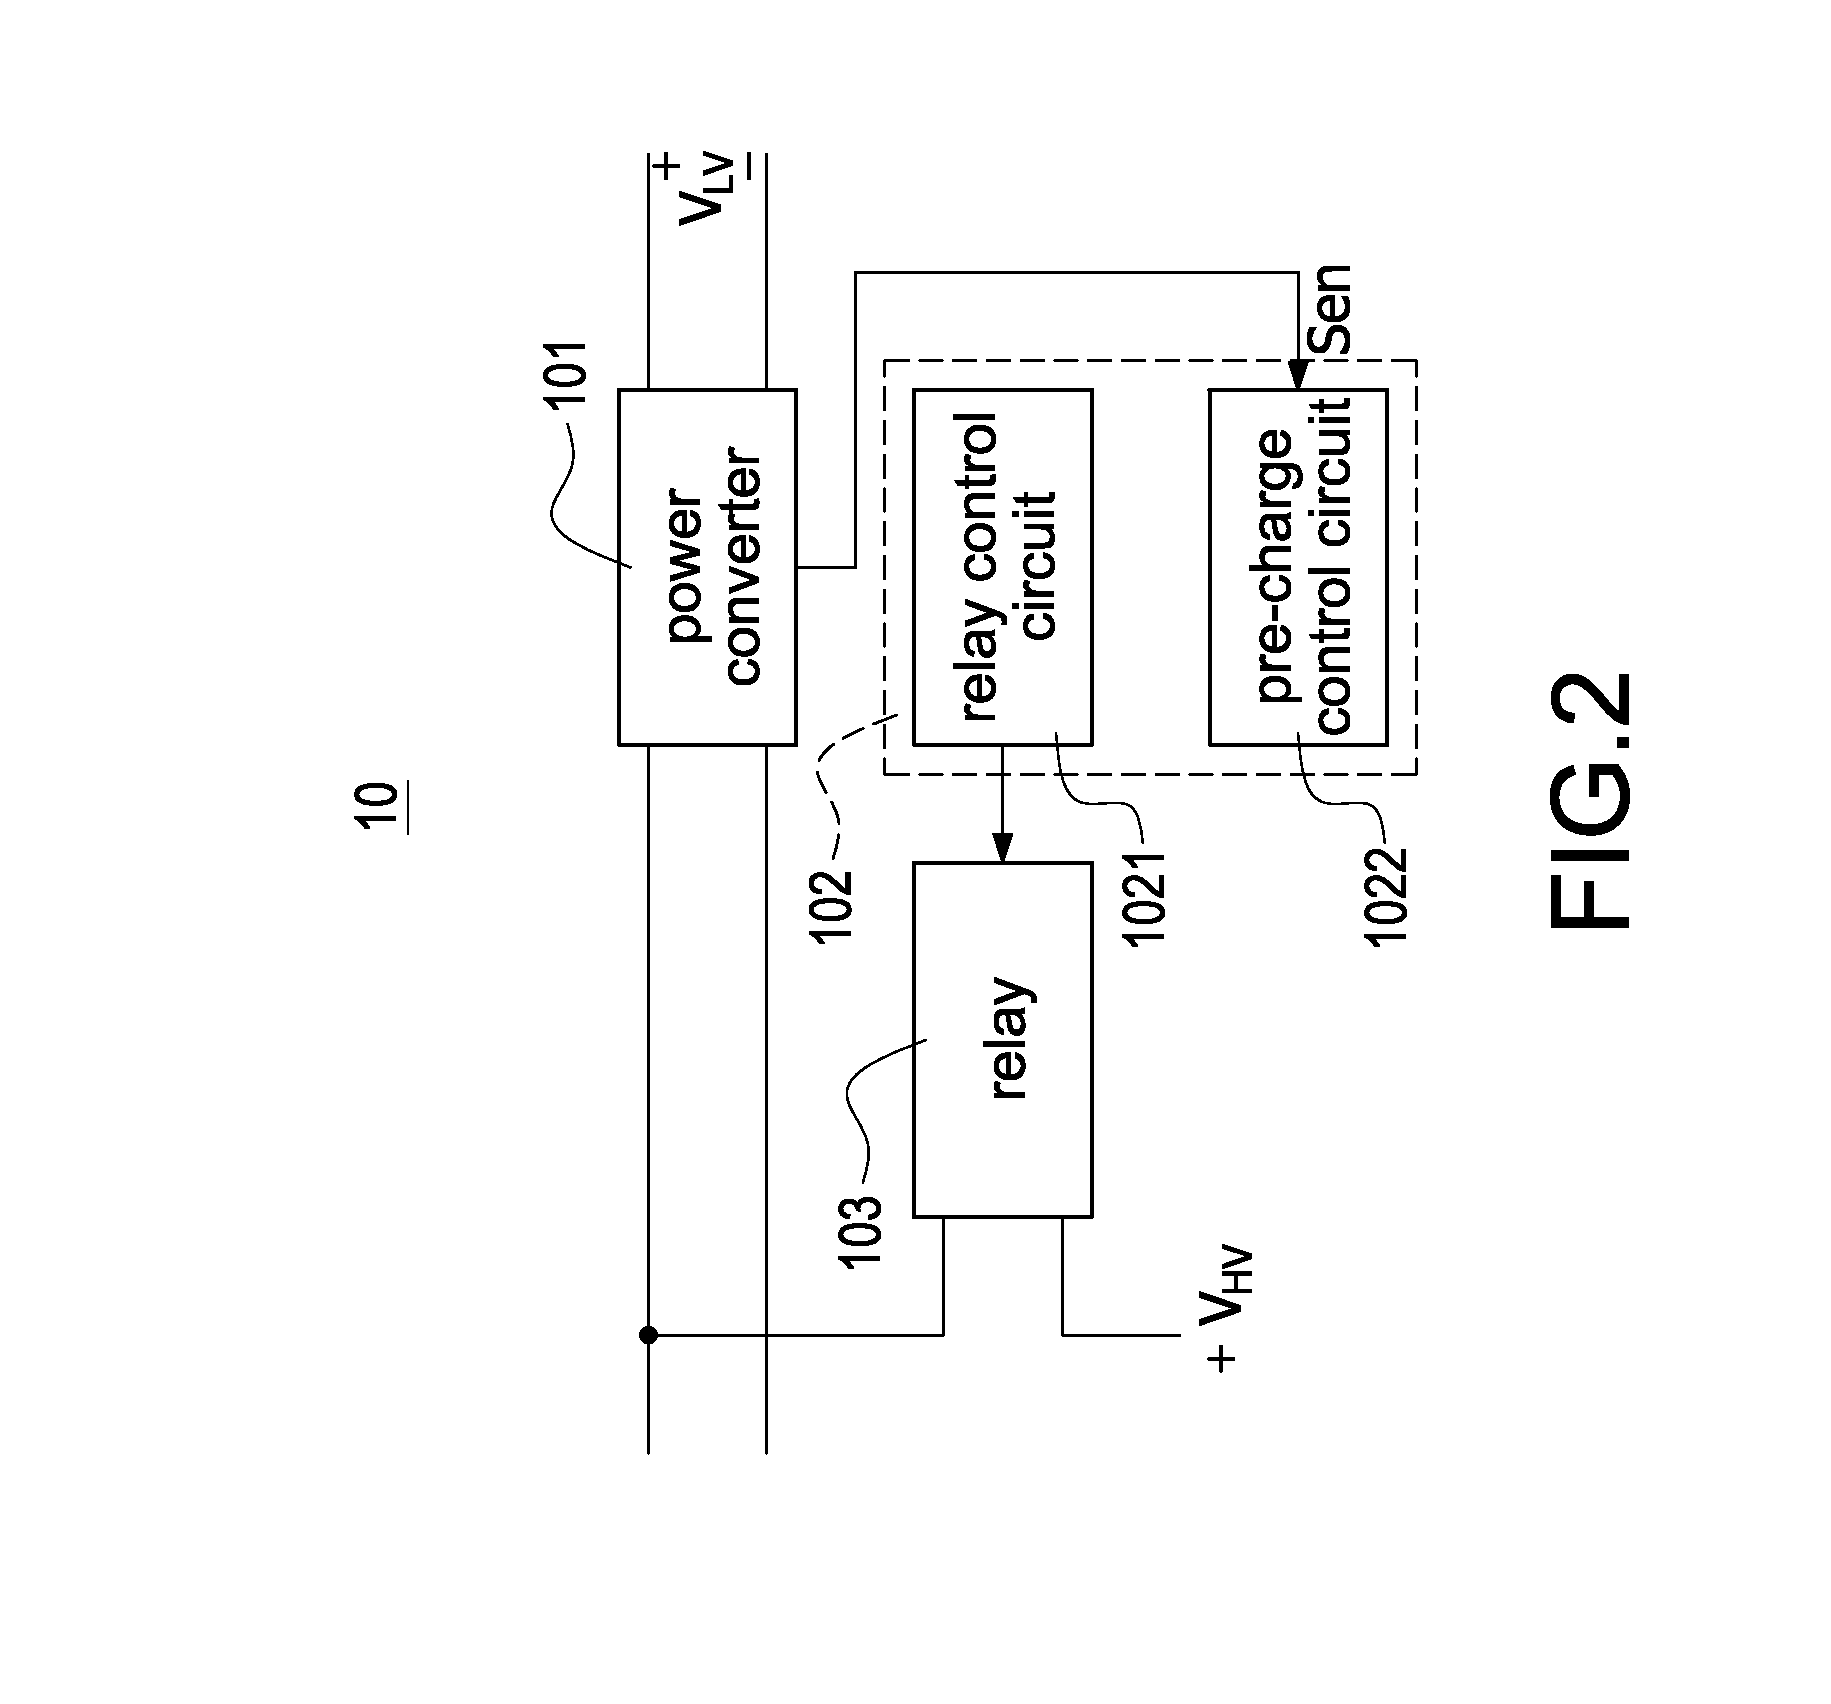 Battery power integration apparatus and hev power system having the same